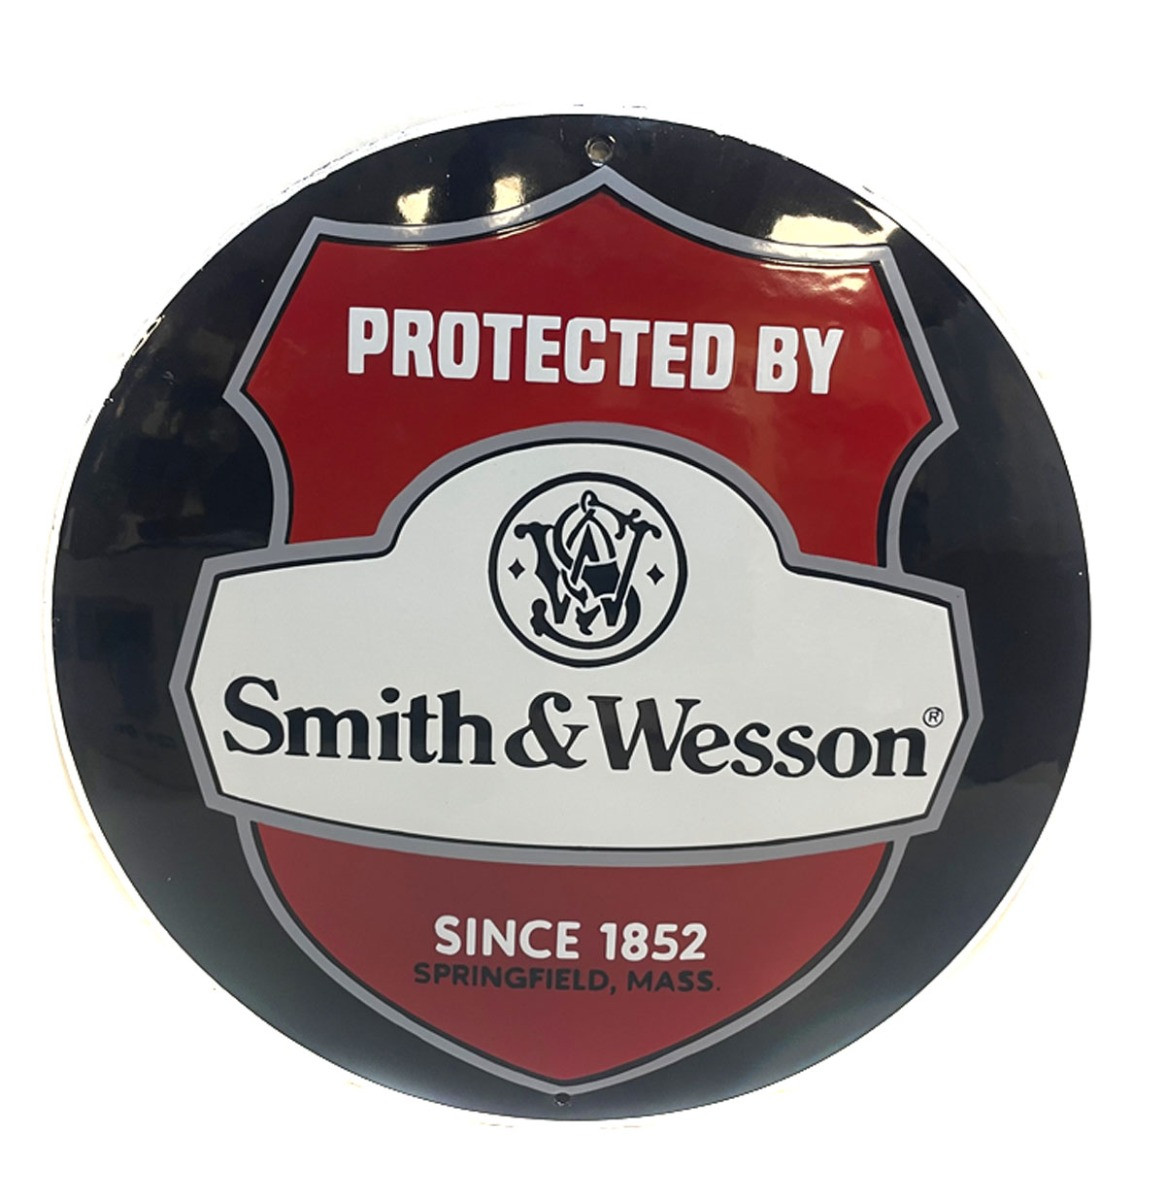 Smith & Wesson Emaille Bord - 35 cm ø